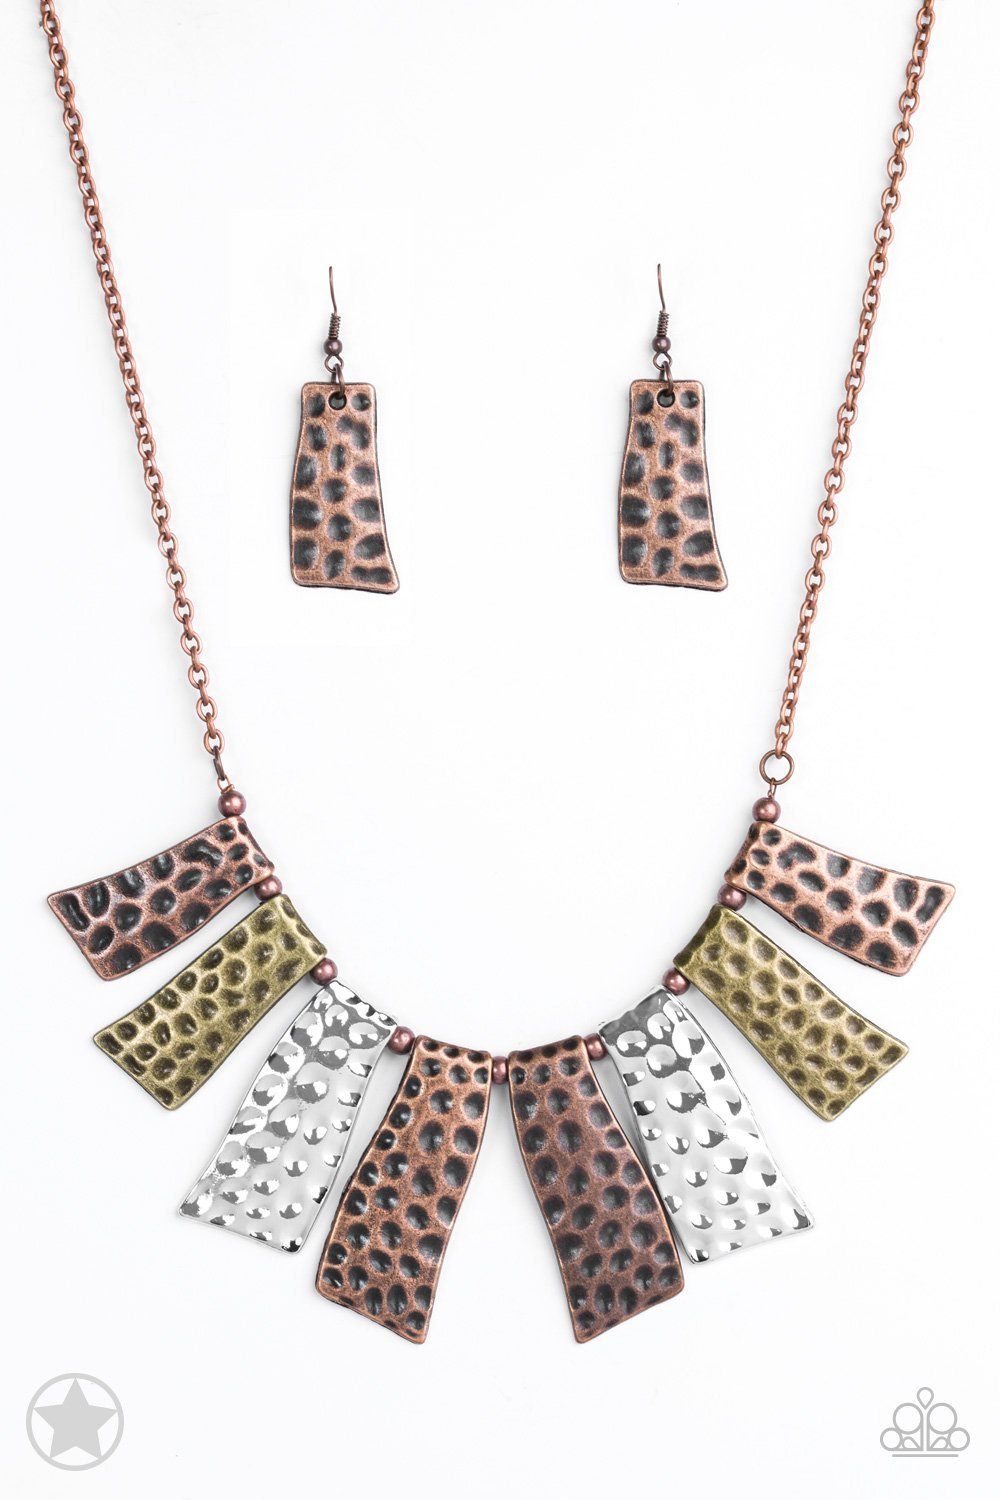 Paparazzi Accessories Fan of the Tribe Blockbuster Necklaces Abstract wavy plates of copper, silver, and brass are texturized with eye-catching hammered divots and alternating copper beads along a copper chain. Features an adjustable clasp closure.